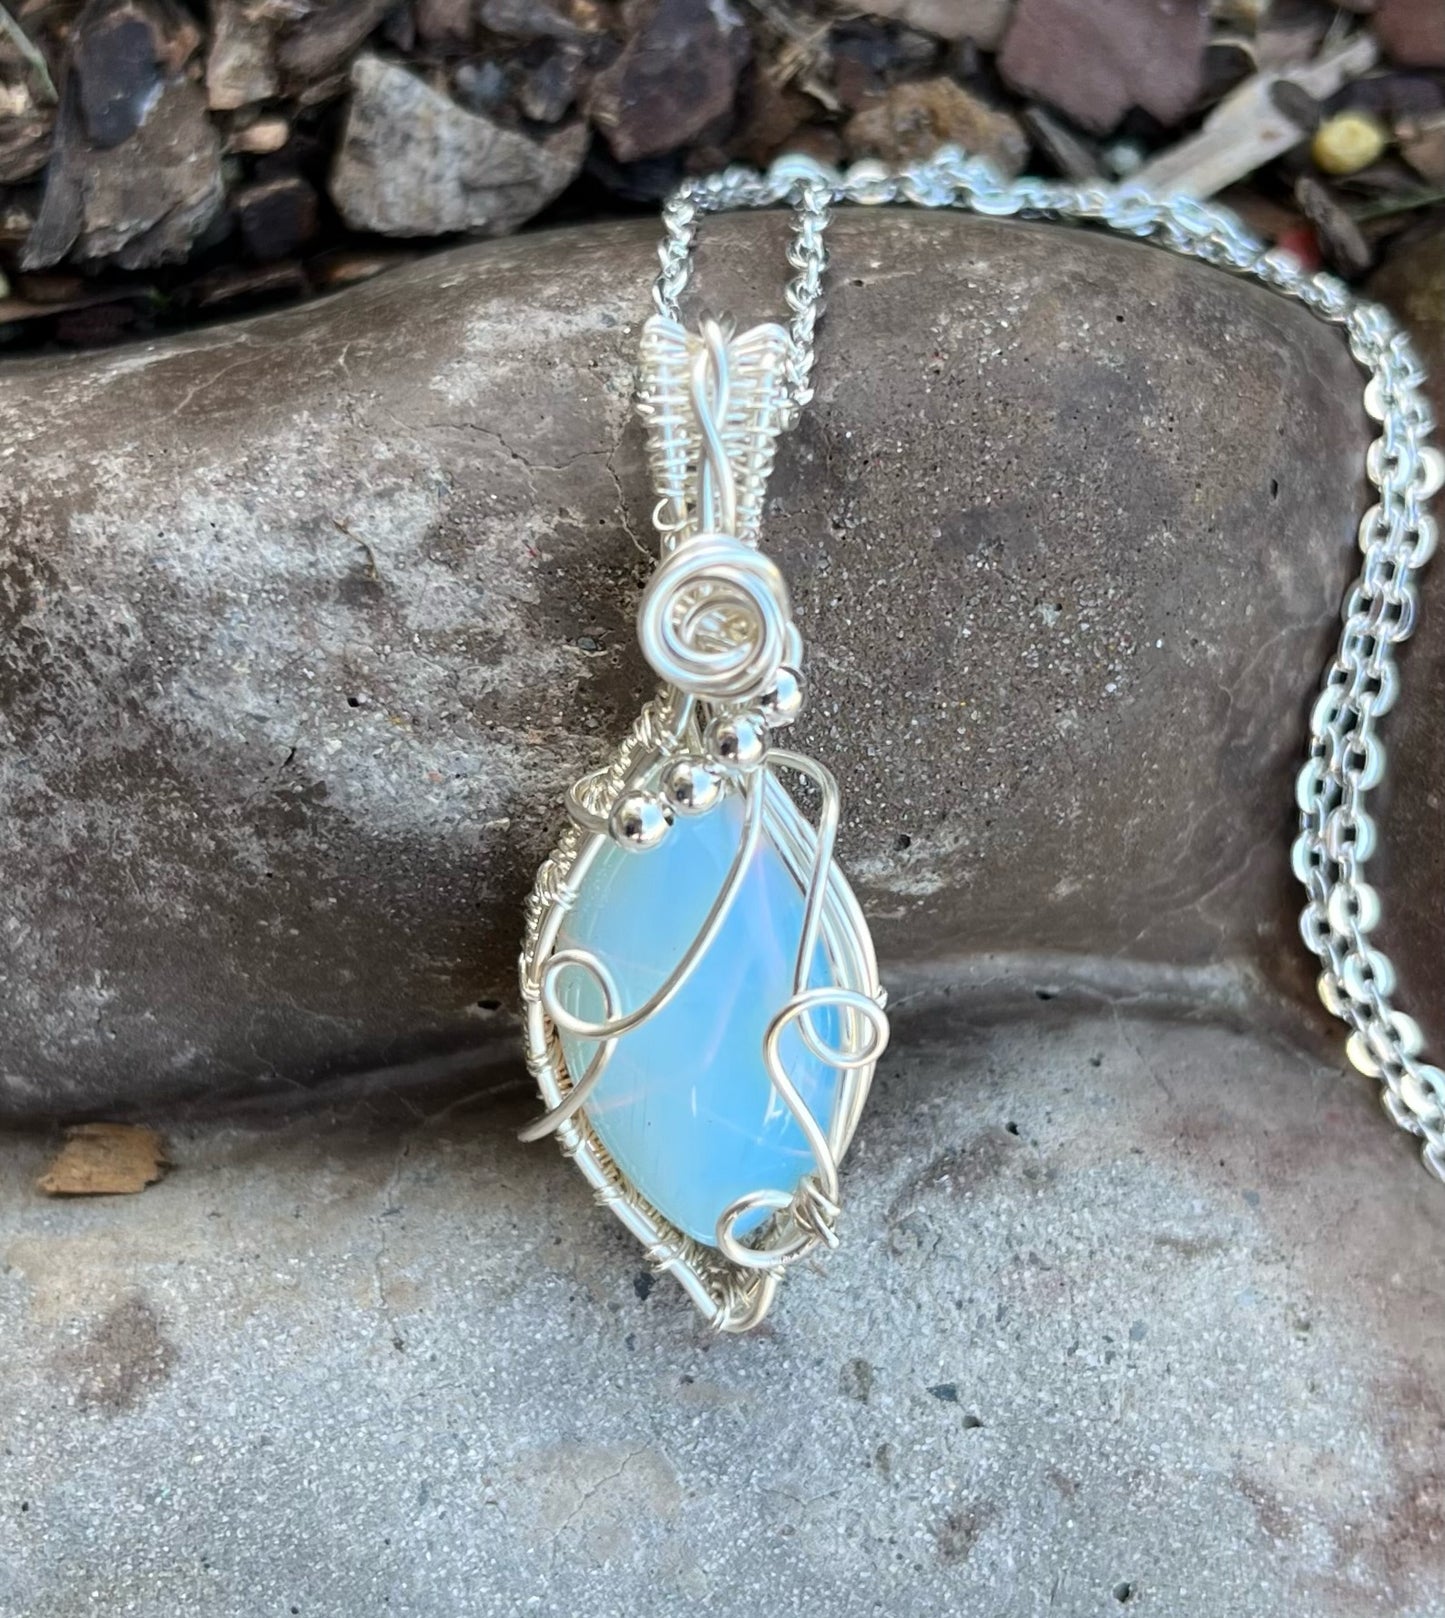 Synthetic Opalite Wrapped in Silver Wire